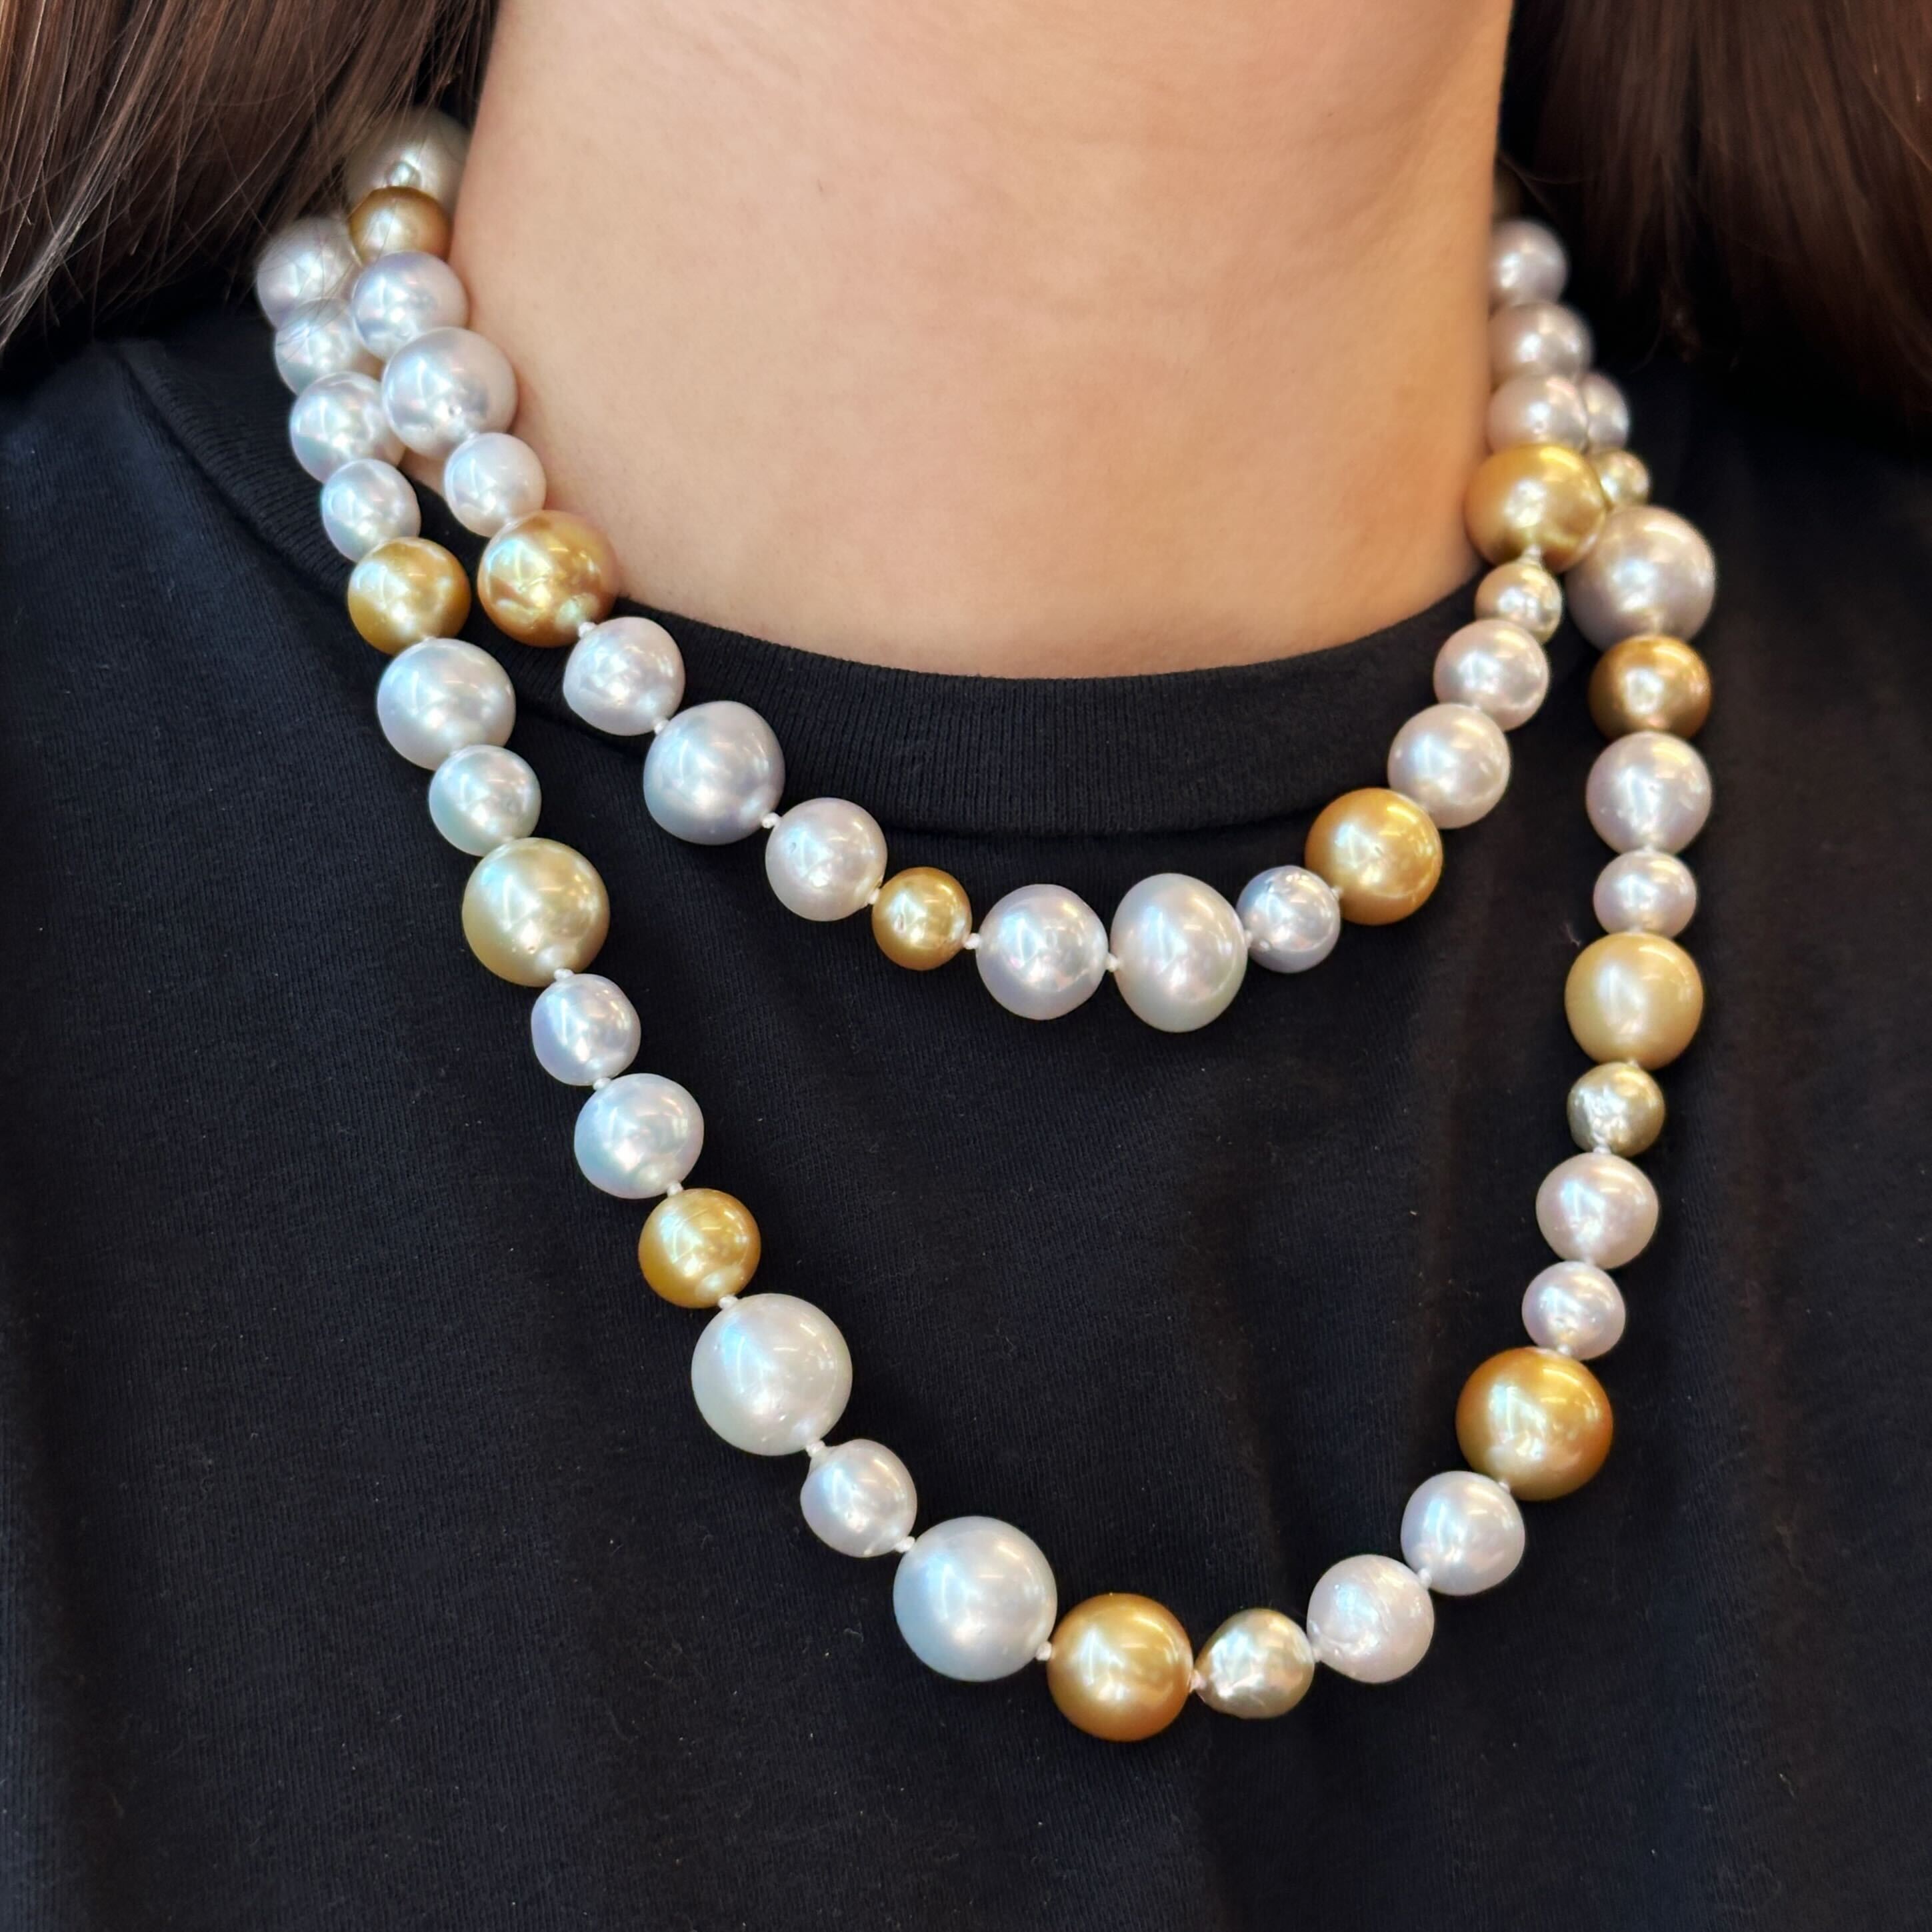 White and Gold South Sea Pearl Necklace Double Wrap